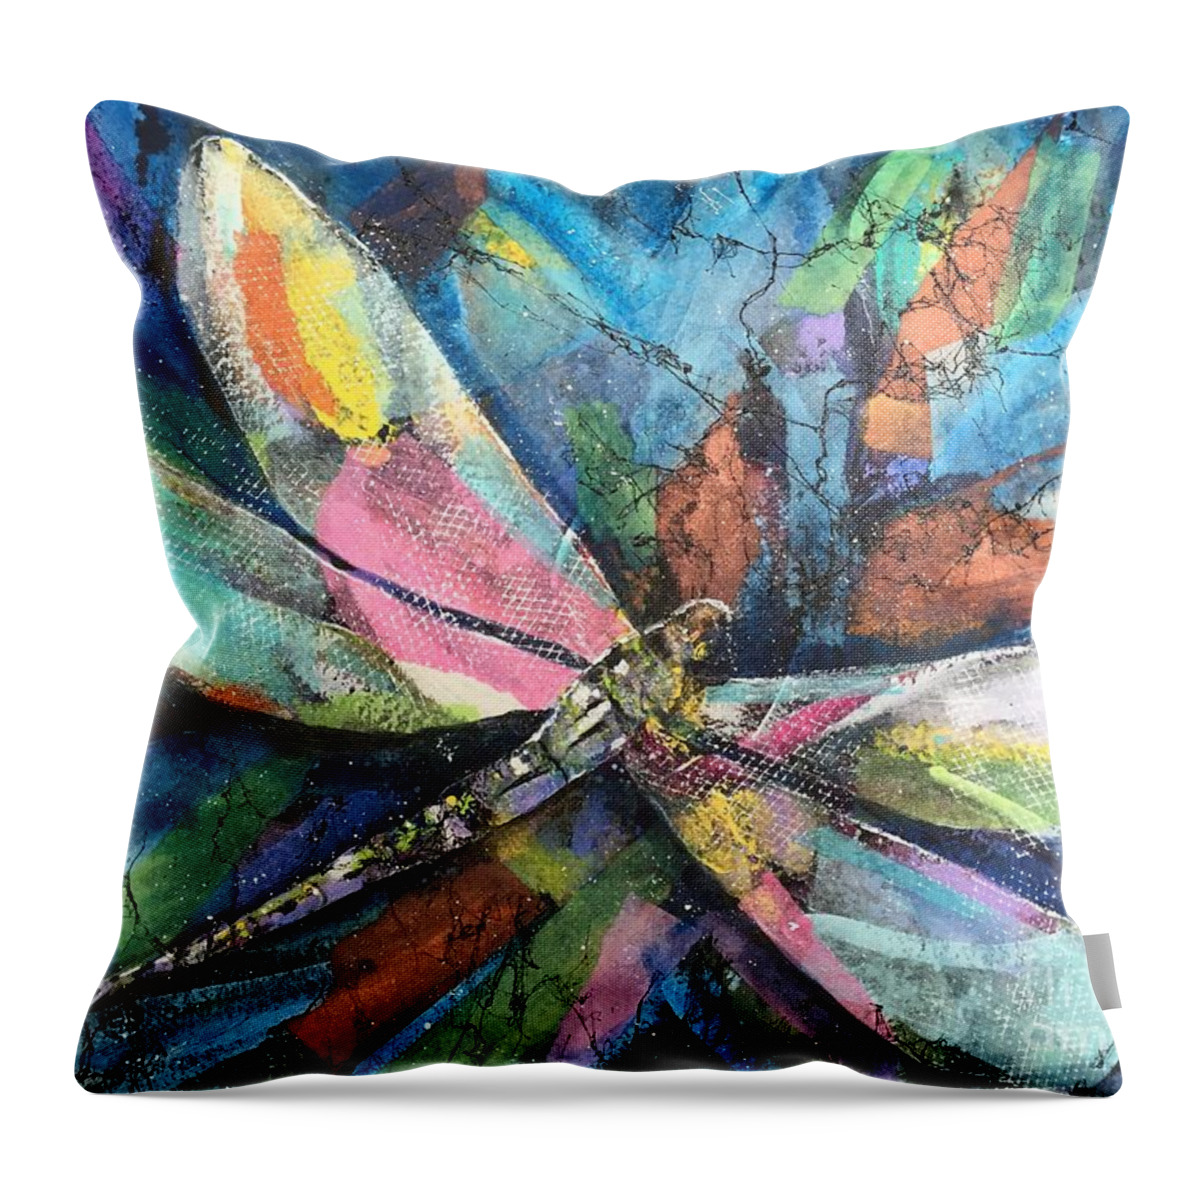 Multicolor Throw Pillow featuring the painting Dragonfly Voyager by Midge Pippel